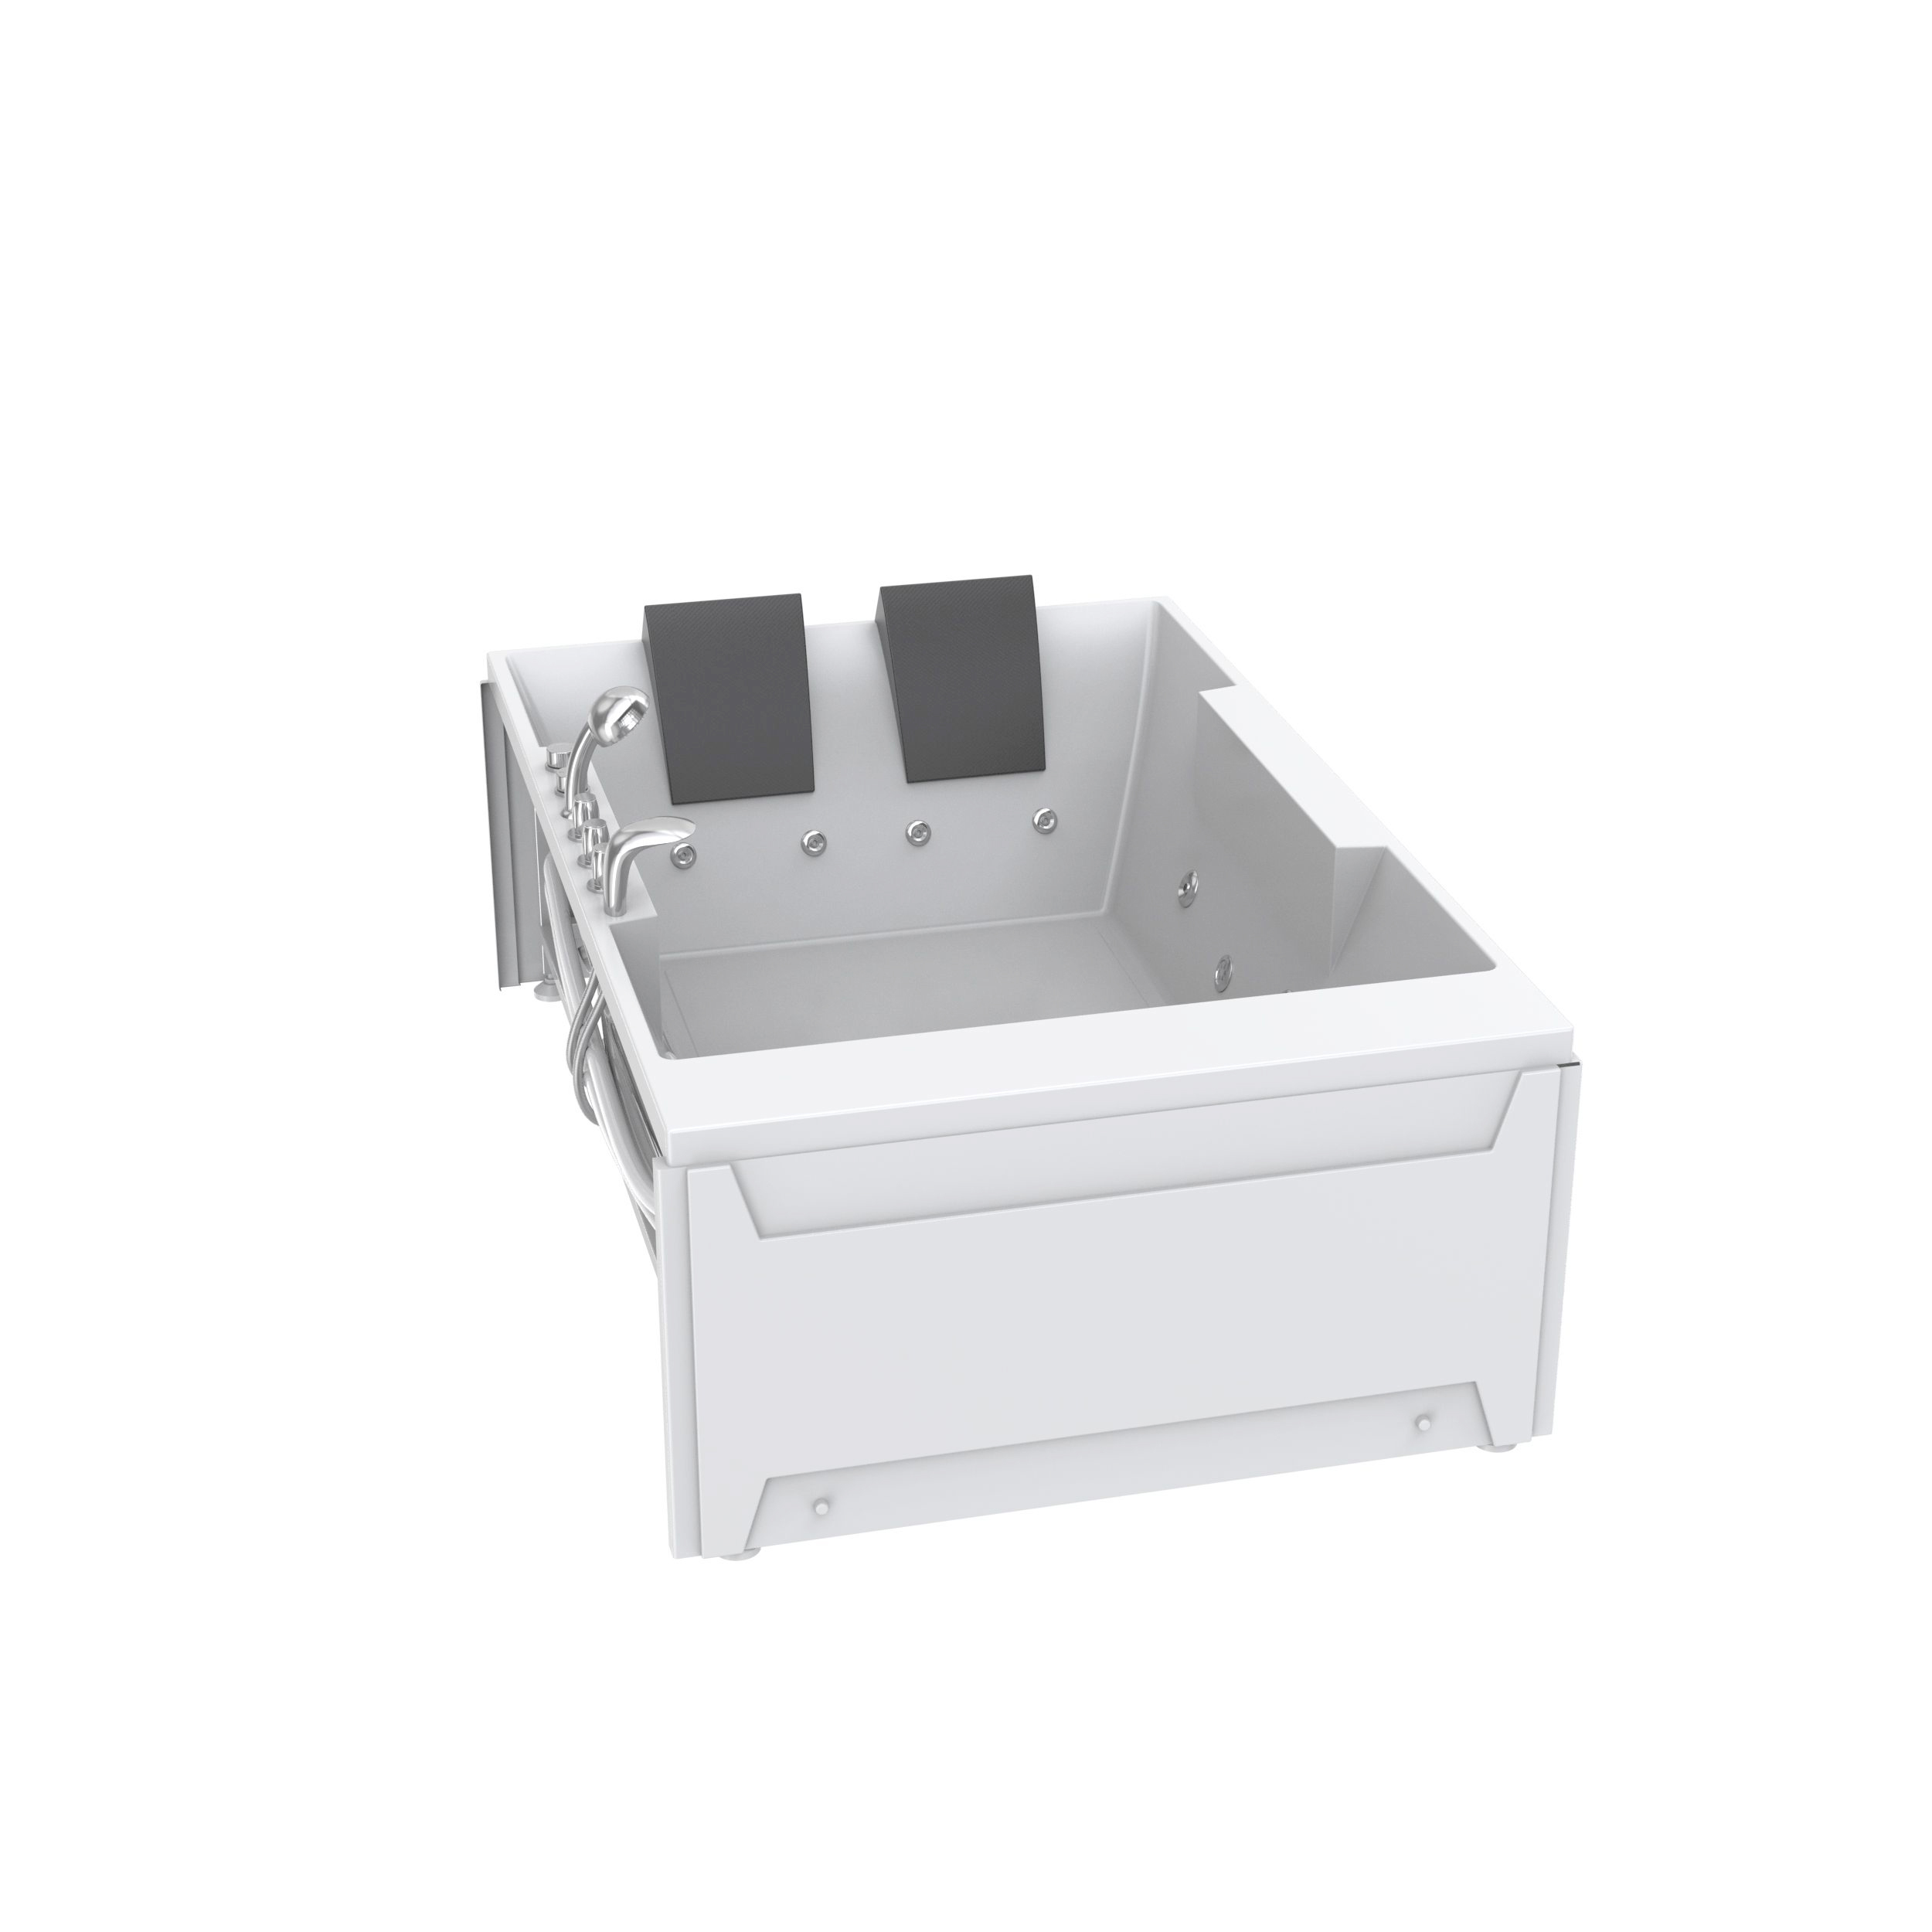 Buy Two Person Accessible Best Acrylic Portable Bathroom Tubs Freestanding  Square Soaking Spa Hydromassage Bathtub With Air Jets from Jiaxing Aokeliya  Sanitary Ware Technology Co., Ltd., China